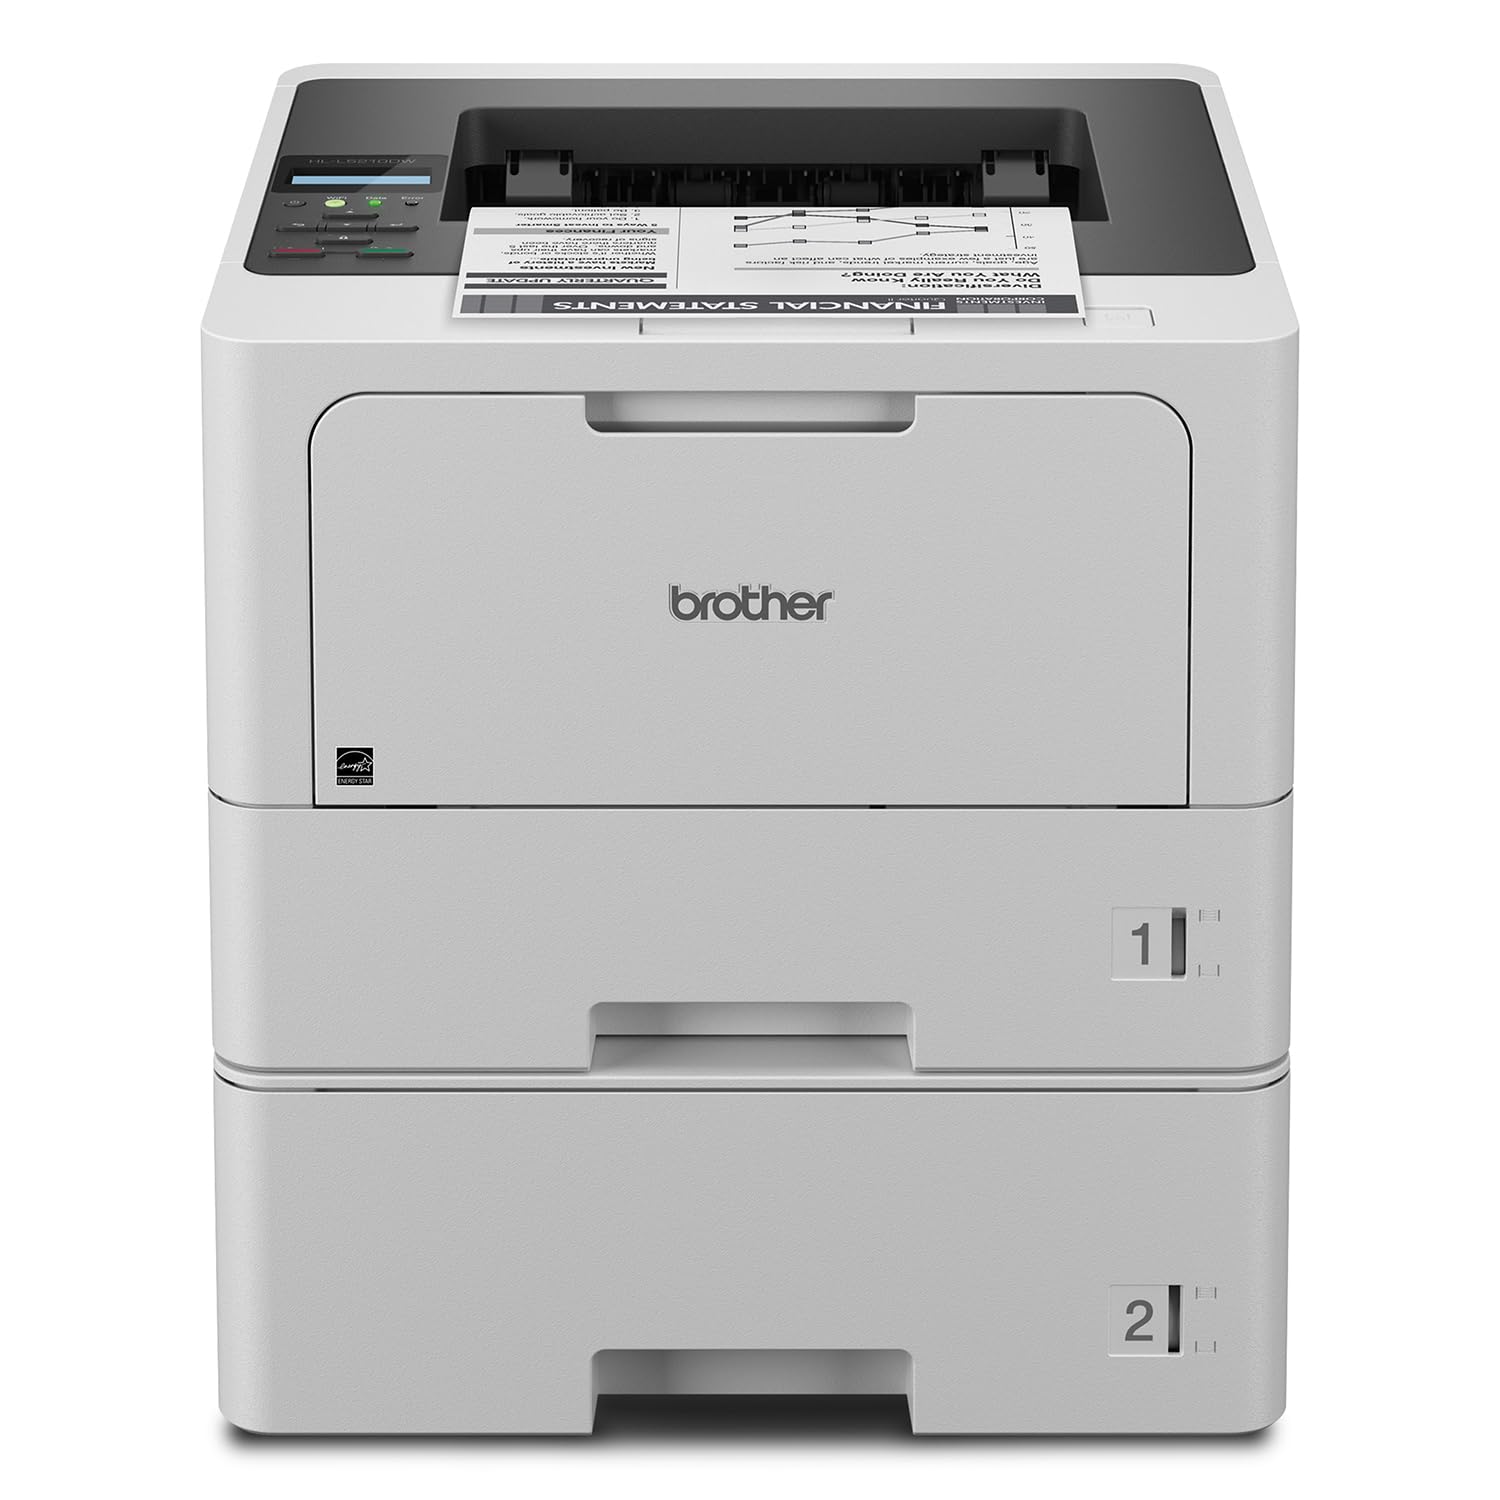 Brother HL-L5210DWT Business Monochrome Laser Printer with Dual Trays, Wireless and Gigabit Ethernet Networking, Duplex Printing, Large Paper Capacity, and Mobile Printing